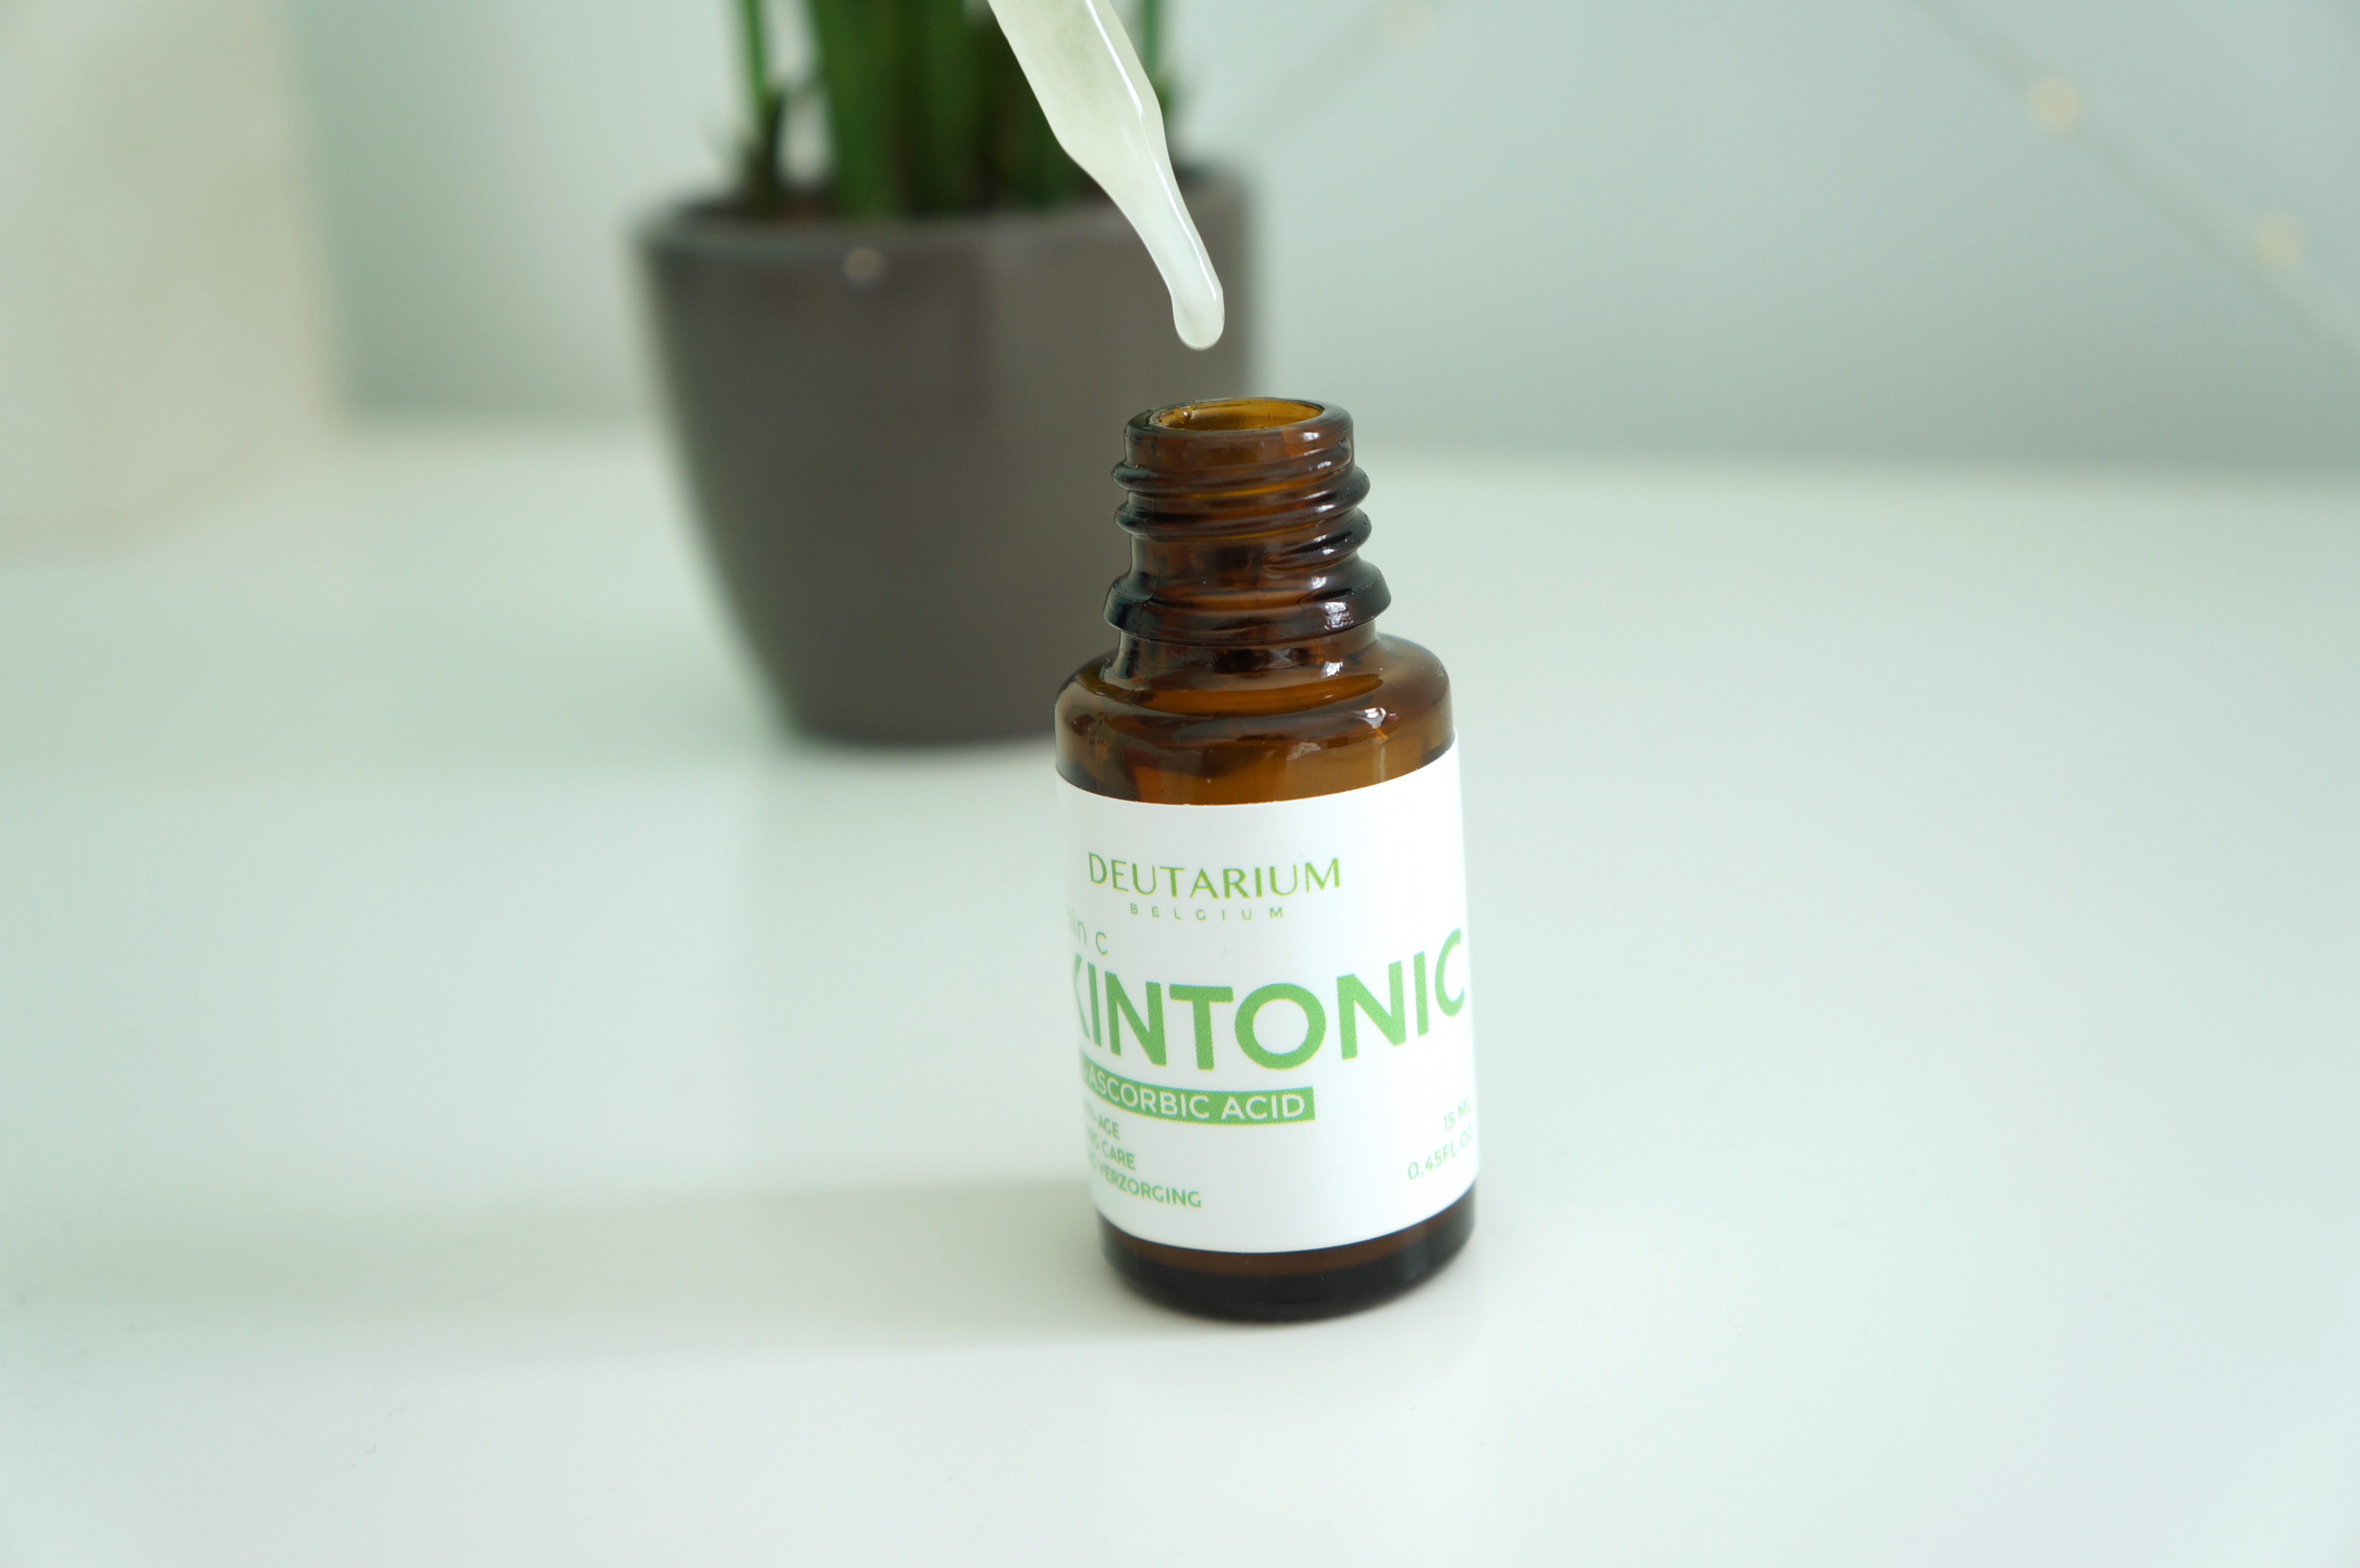 Skintonic by Deutarium / Pic by 1FDLE.